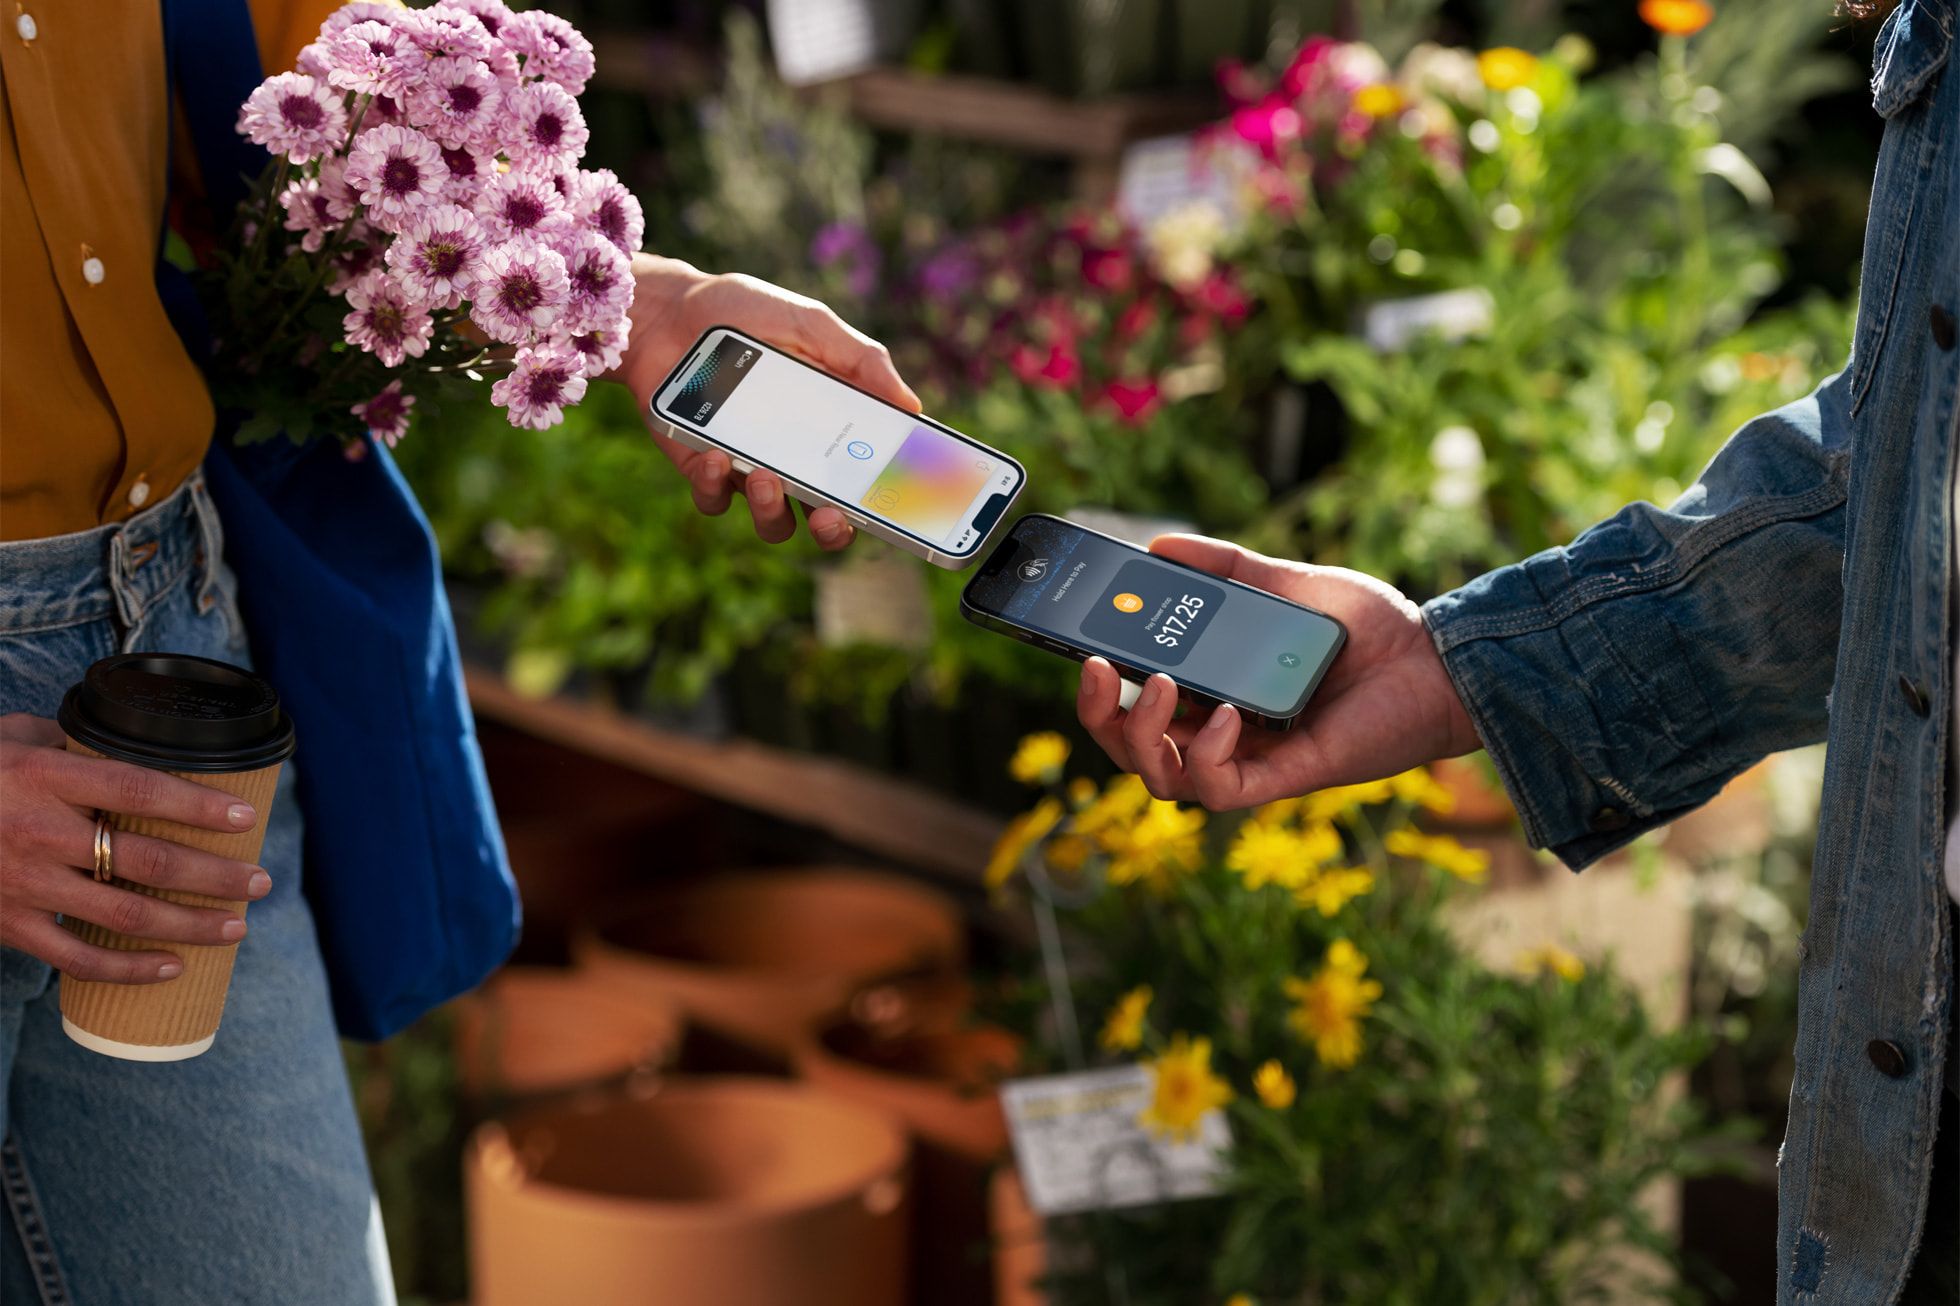 Apple Tap to Pay support transaction occuring in a flower market